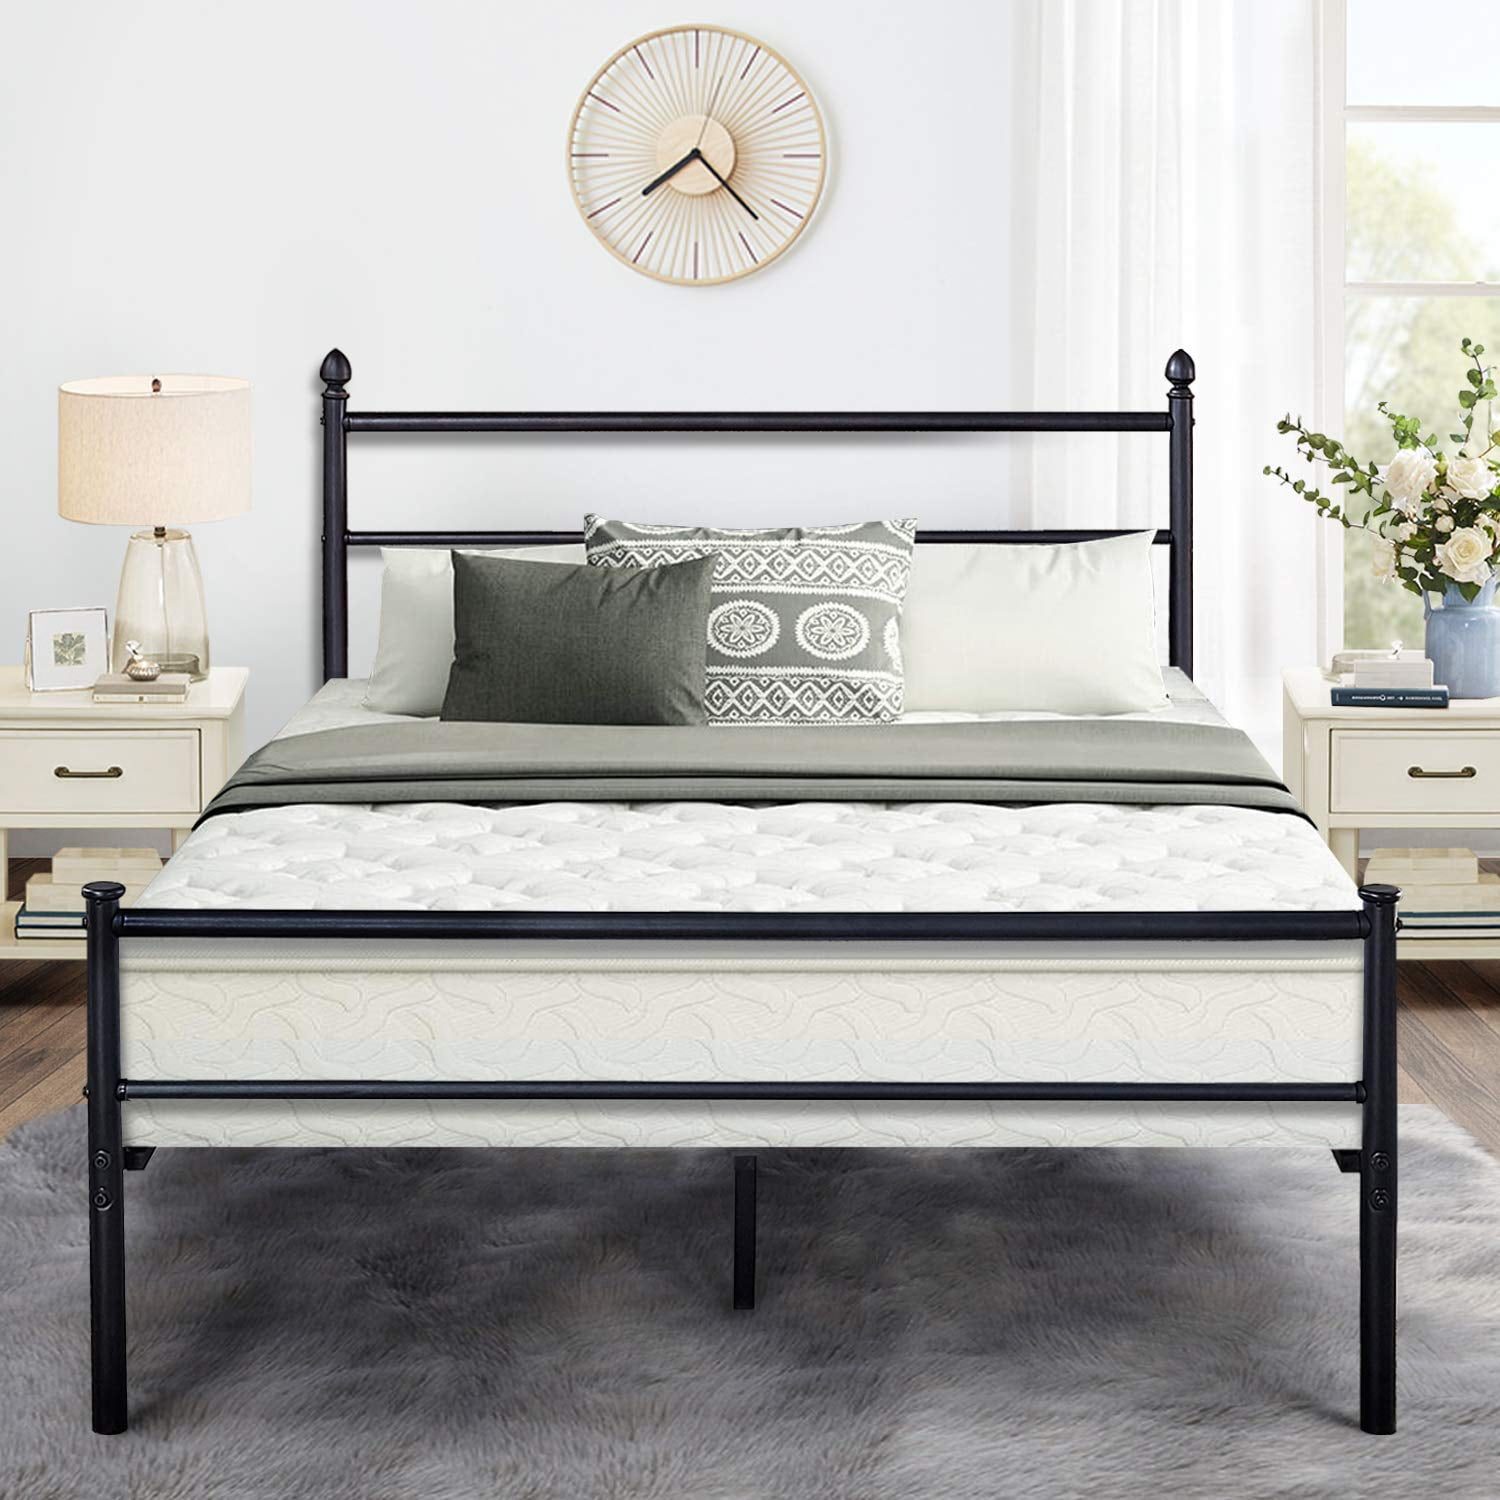 Vecelo Metal Full Size Platform Bed Frame for Bedroom,Simple Style with